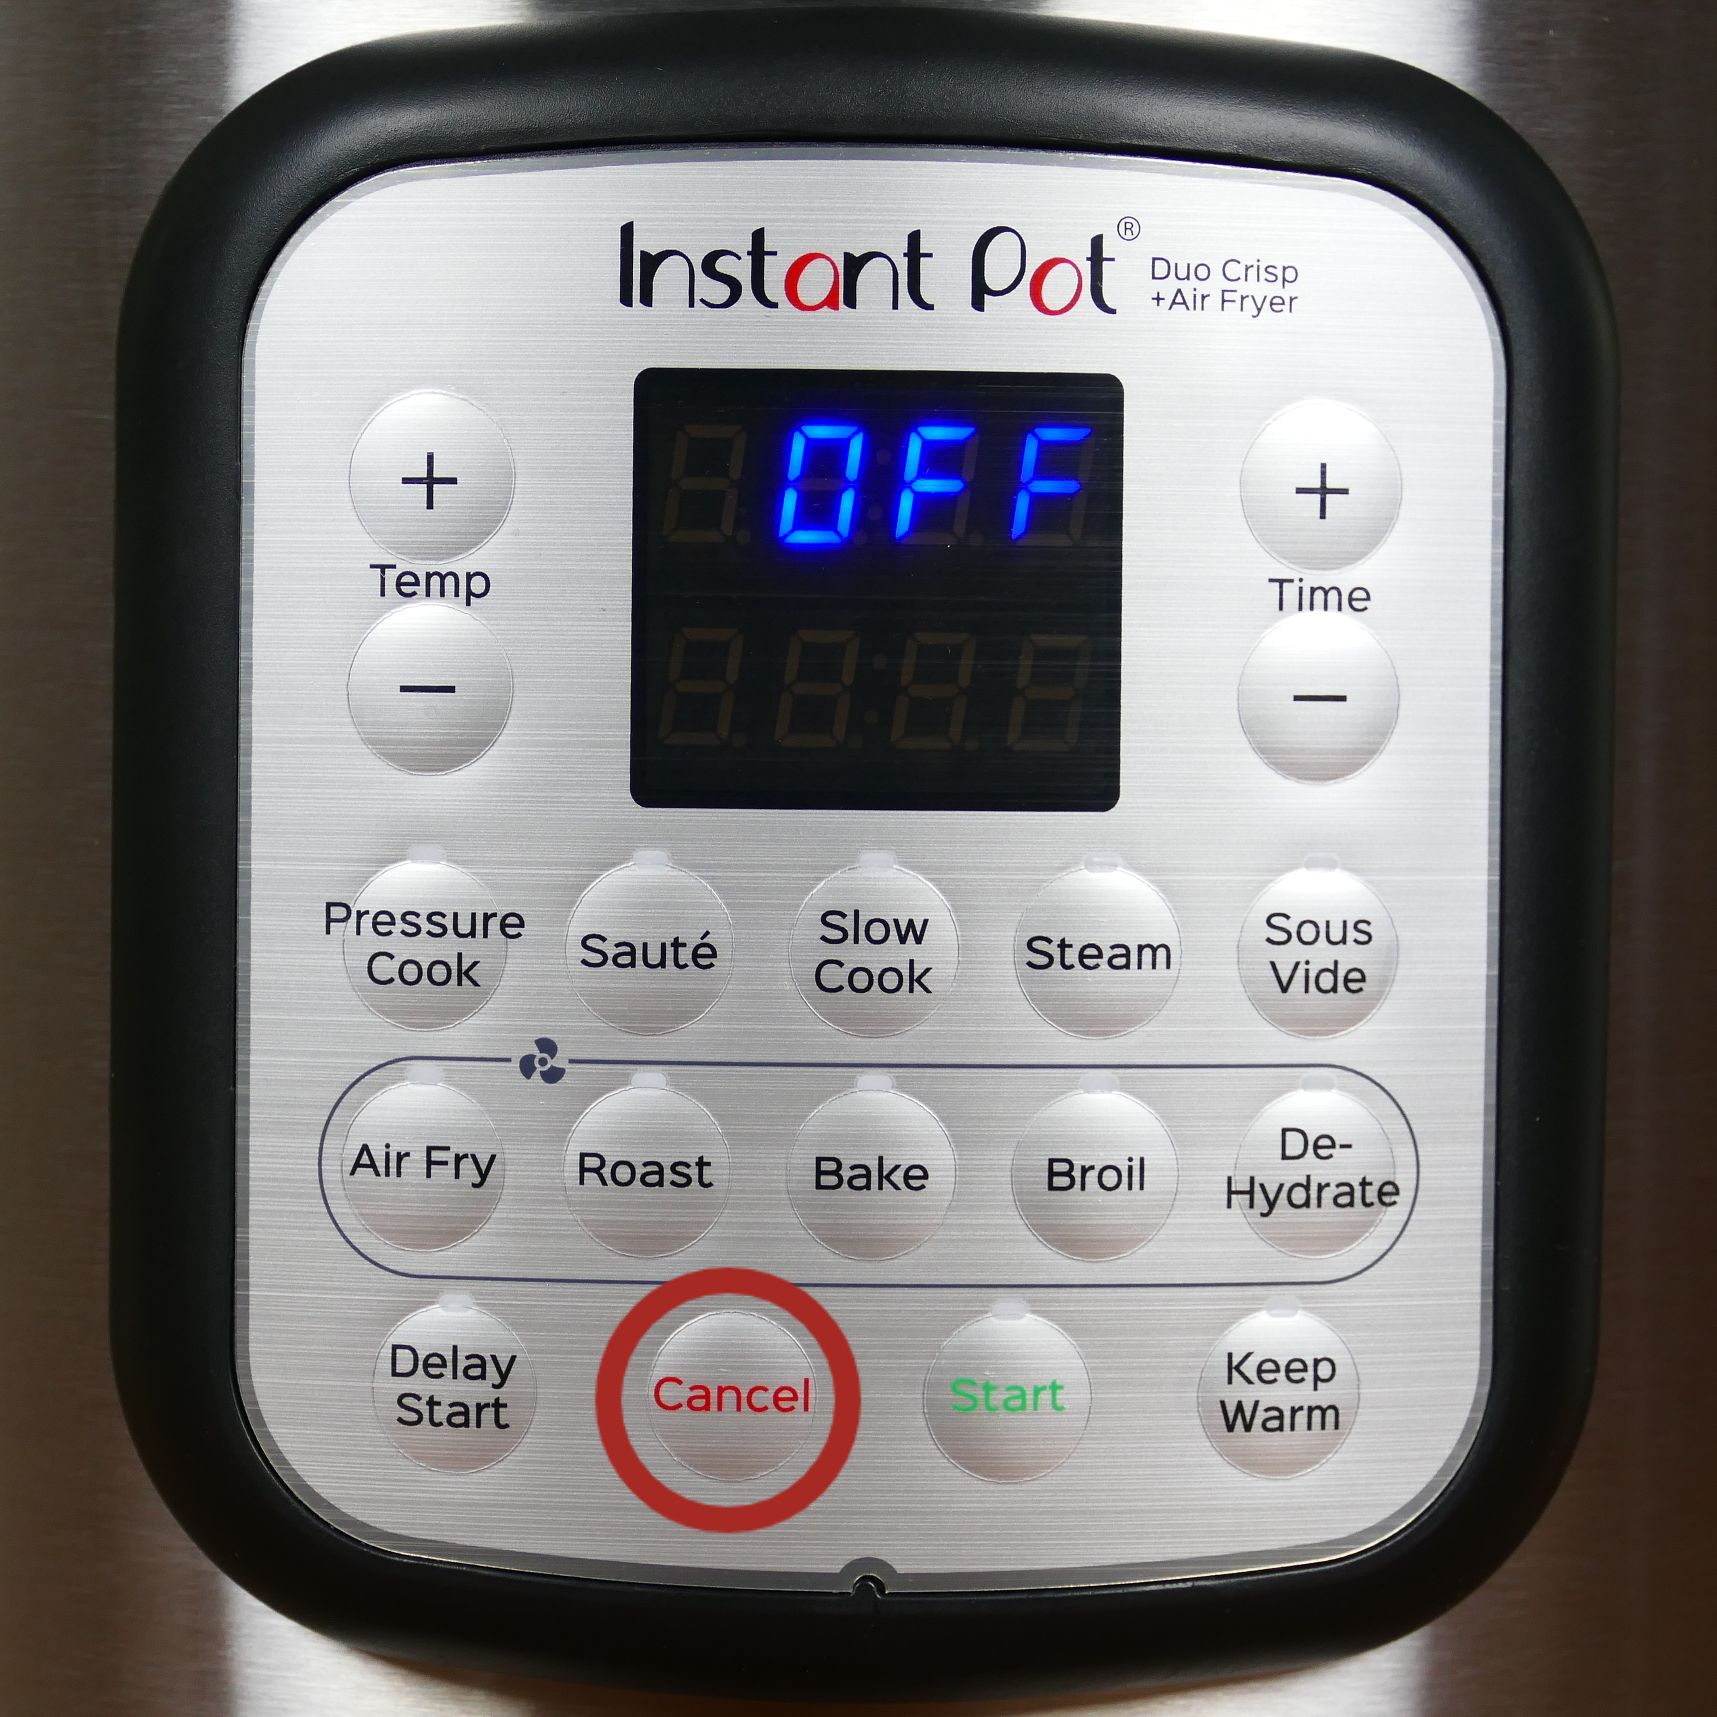 Instant Pot Duo Crisp Display Panel Cancel button circled in red